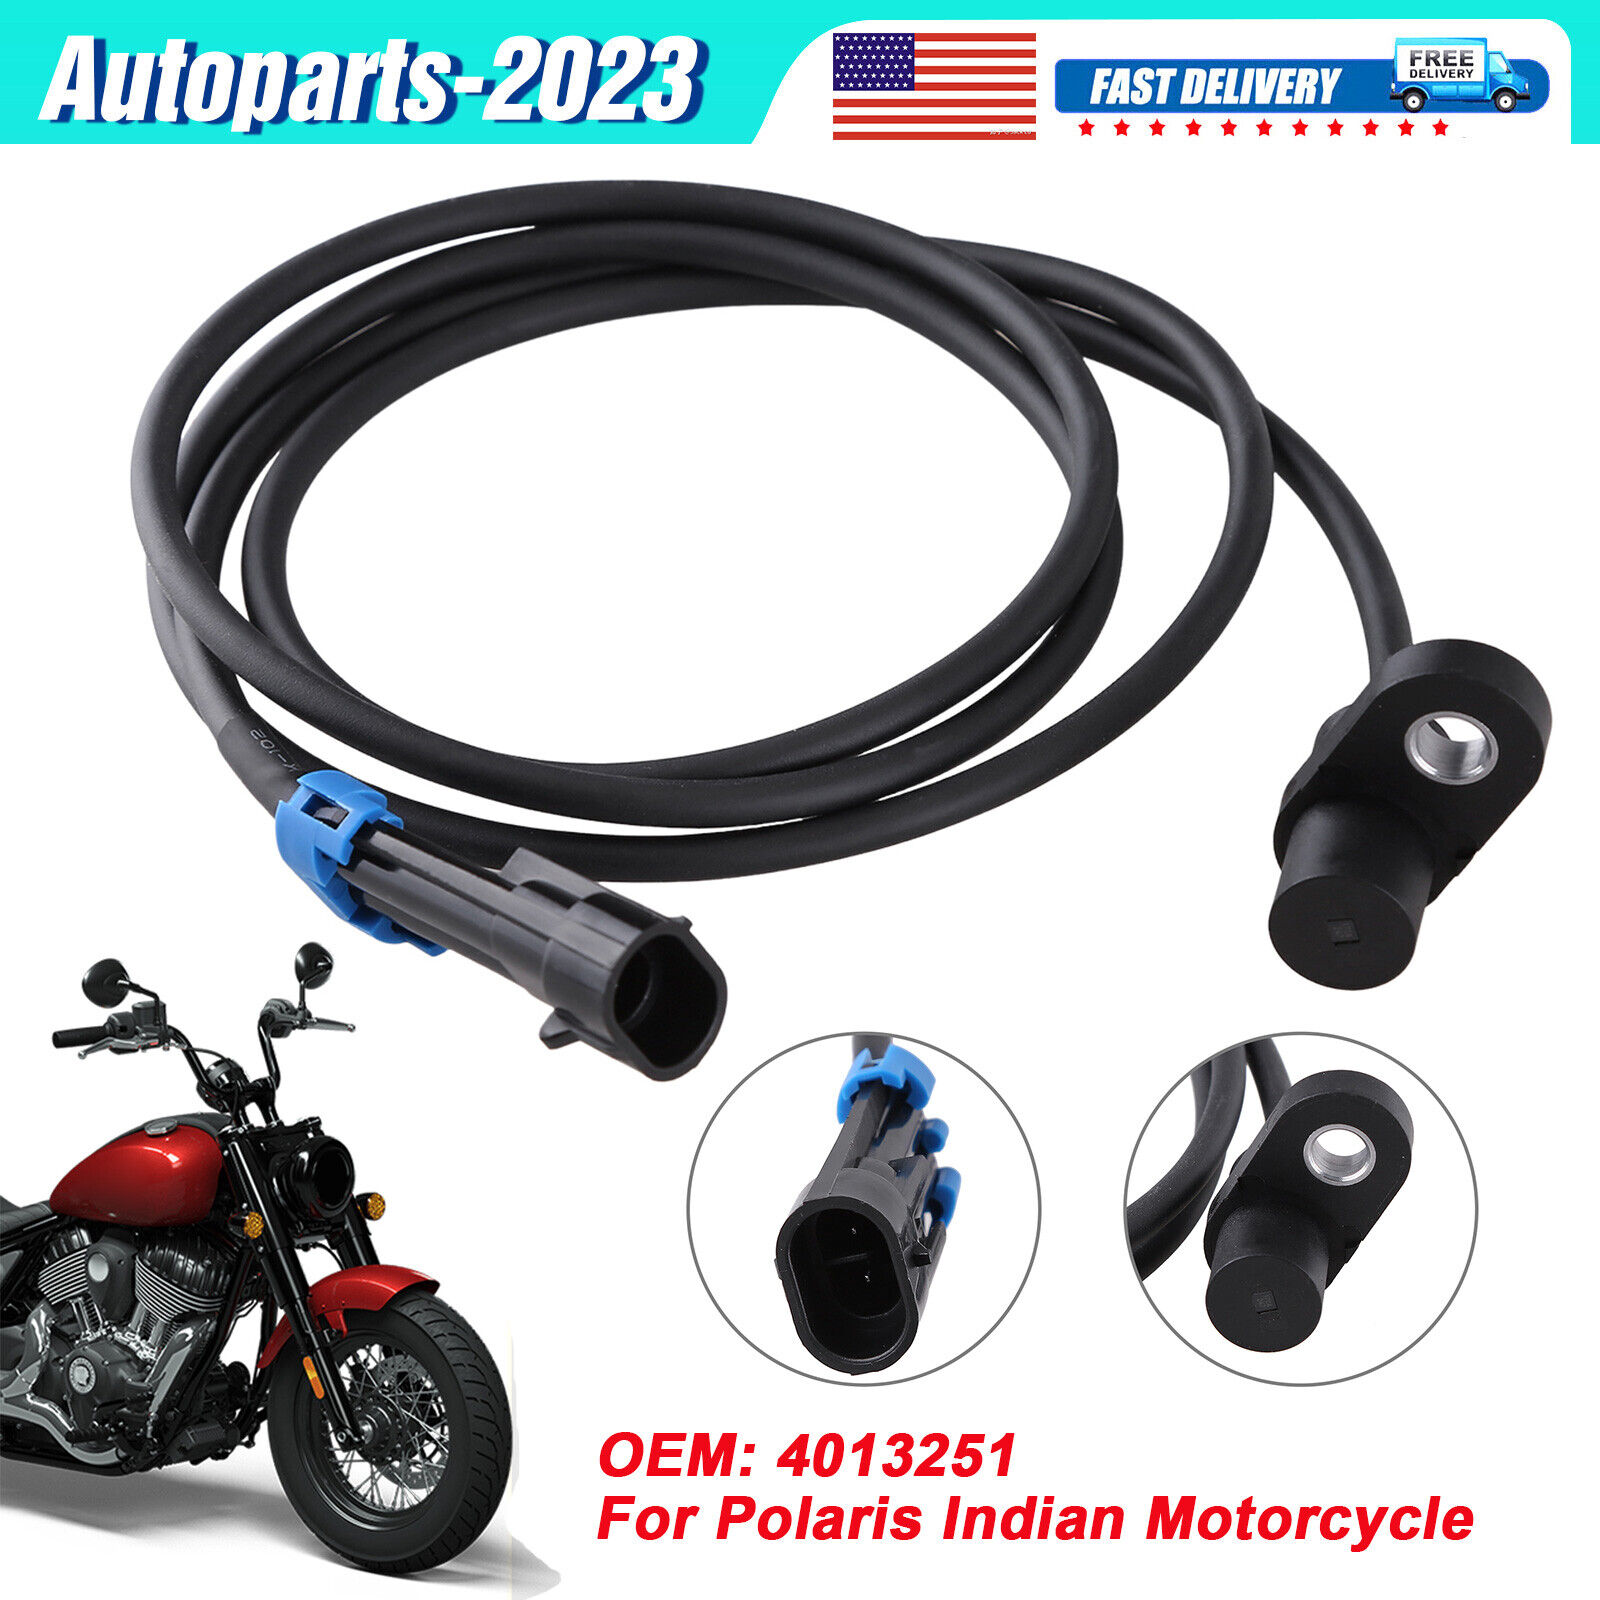 New Motorcycle Wheel Speed Sensor 4013251 Fits For Polaris Indian Motorcycle